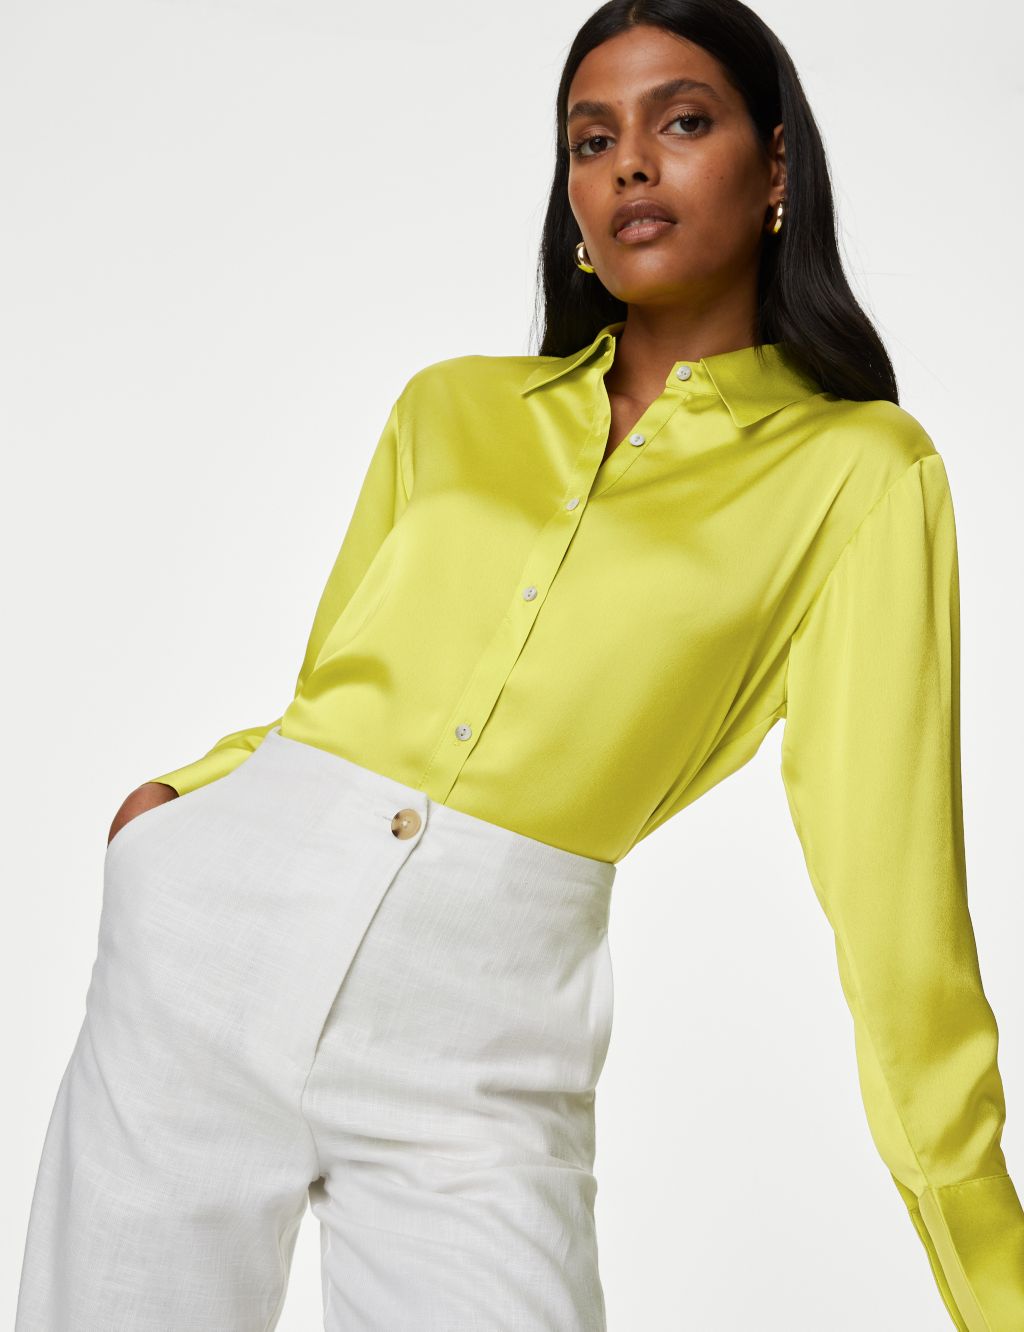 Page 6 - Women’s Collared-Neck Shirts & Blouses | M&S